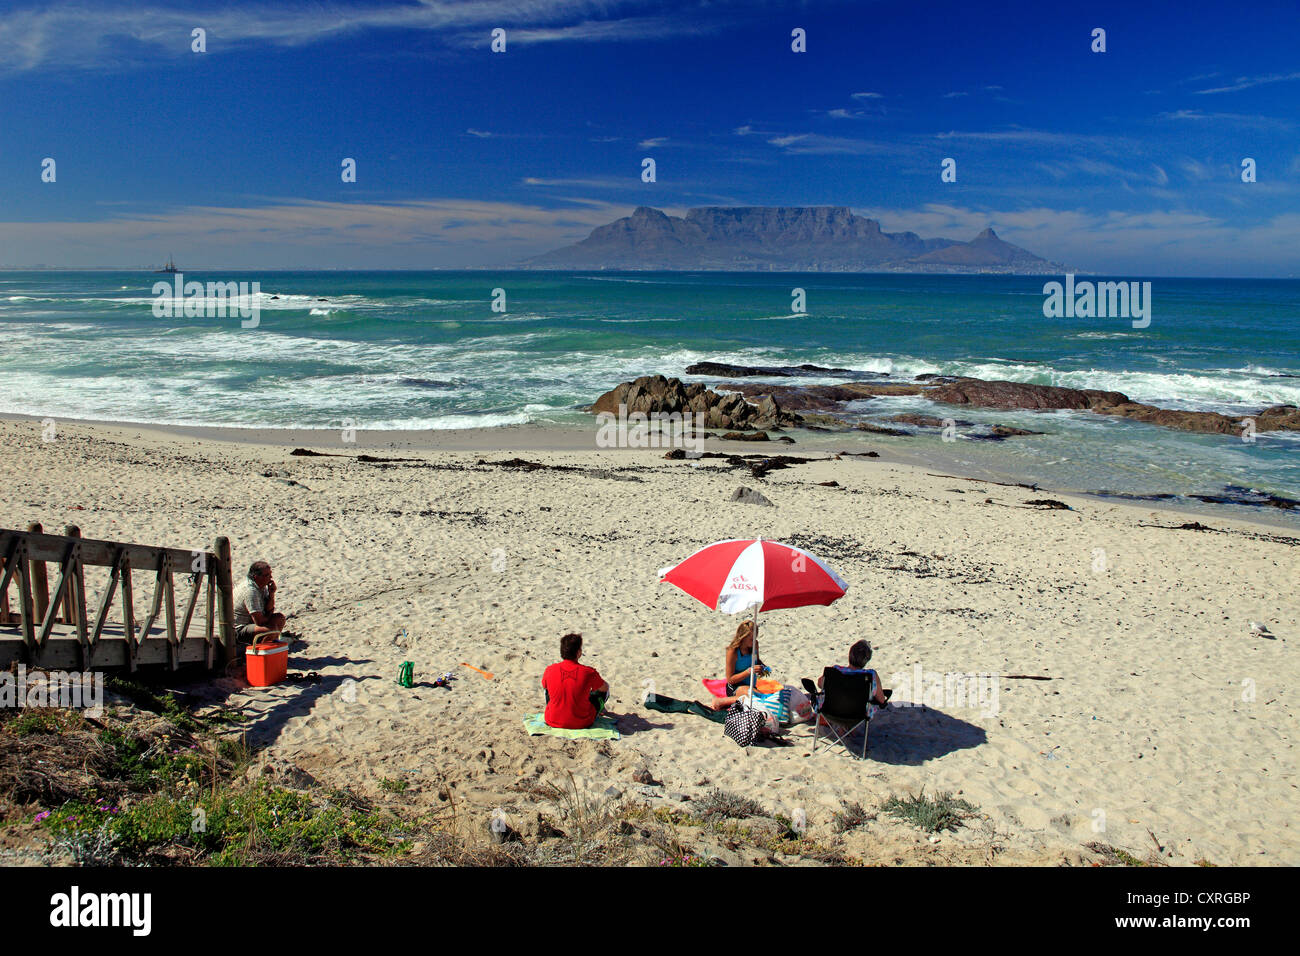 Tourists on the beach, Bloubergstrand beach, Table Mountain at back, Cape Town, South Africa, Africa Stock Photo